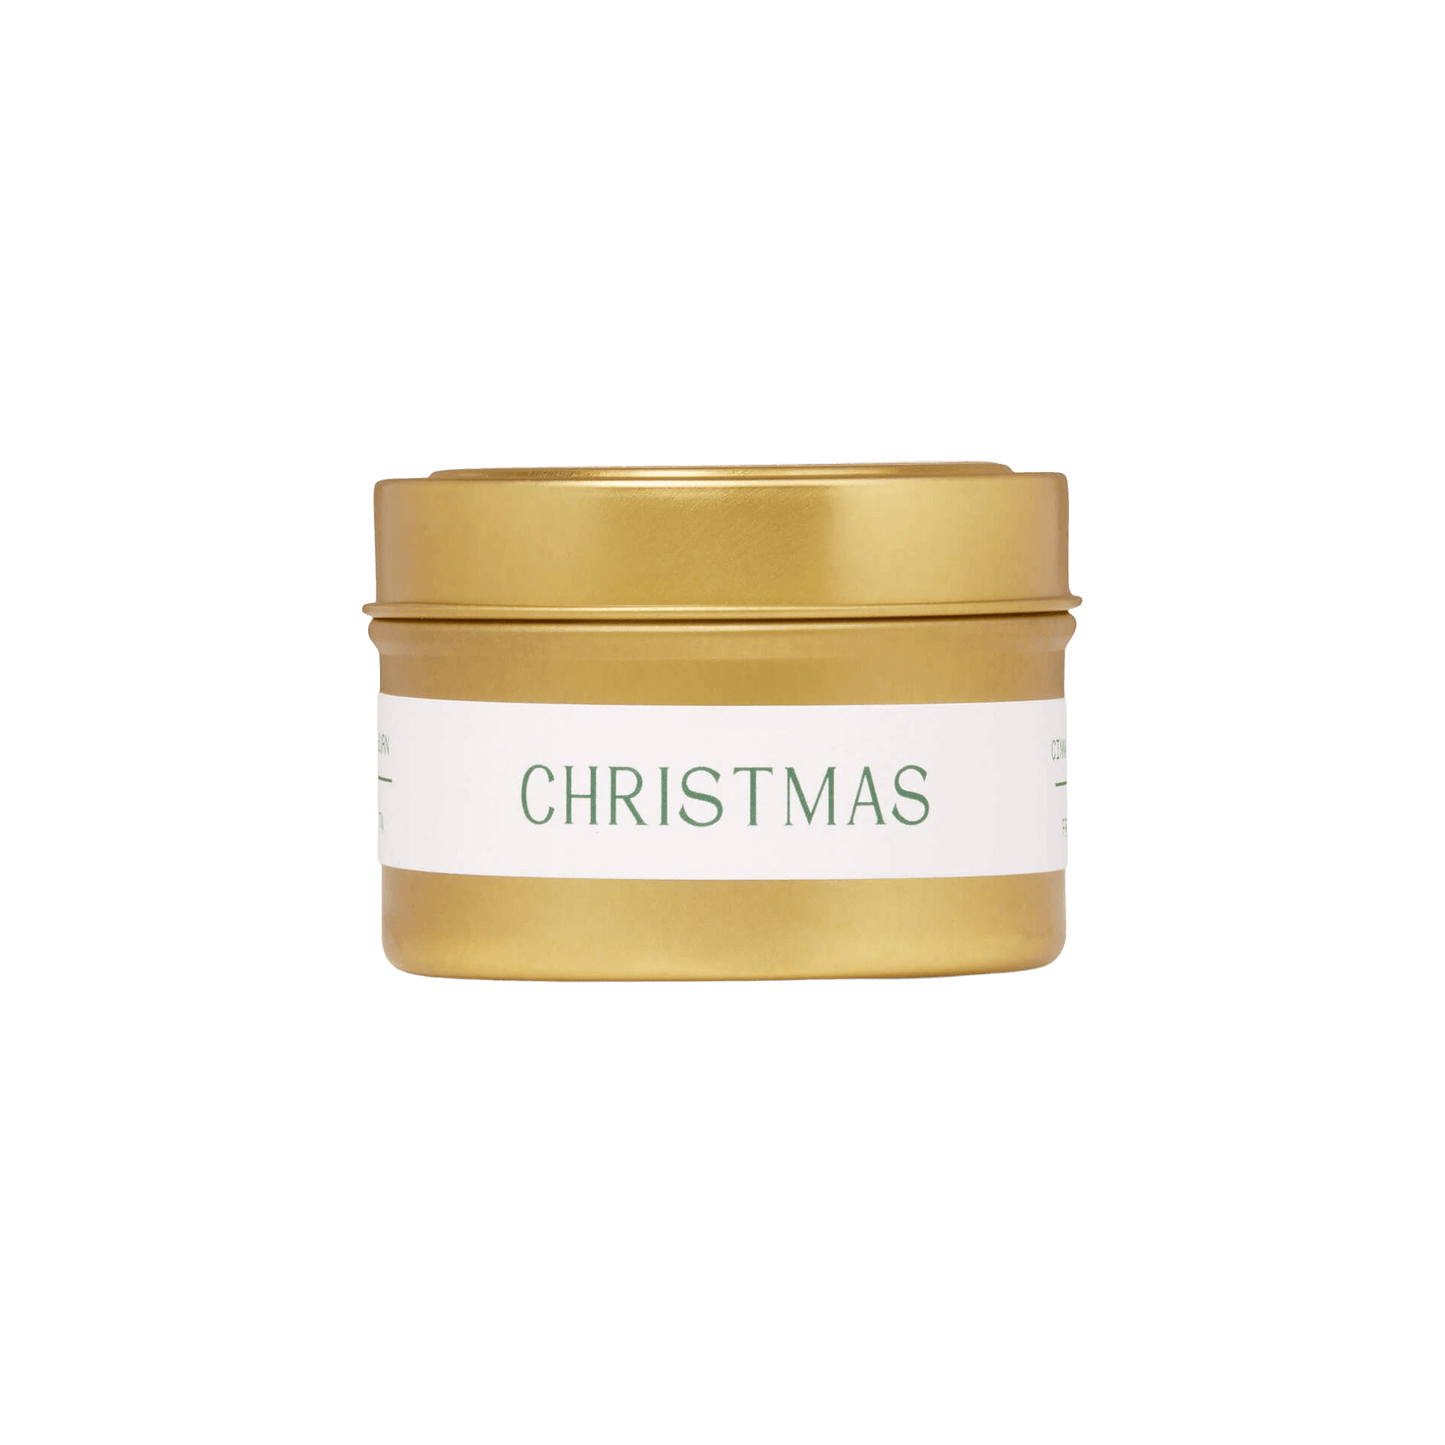 Christmas Travel Candle - The Roosevelts Candle Co.